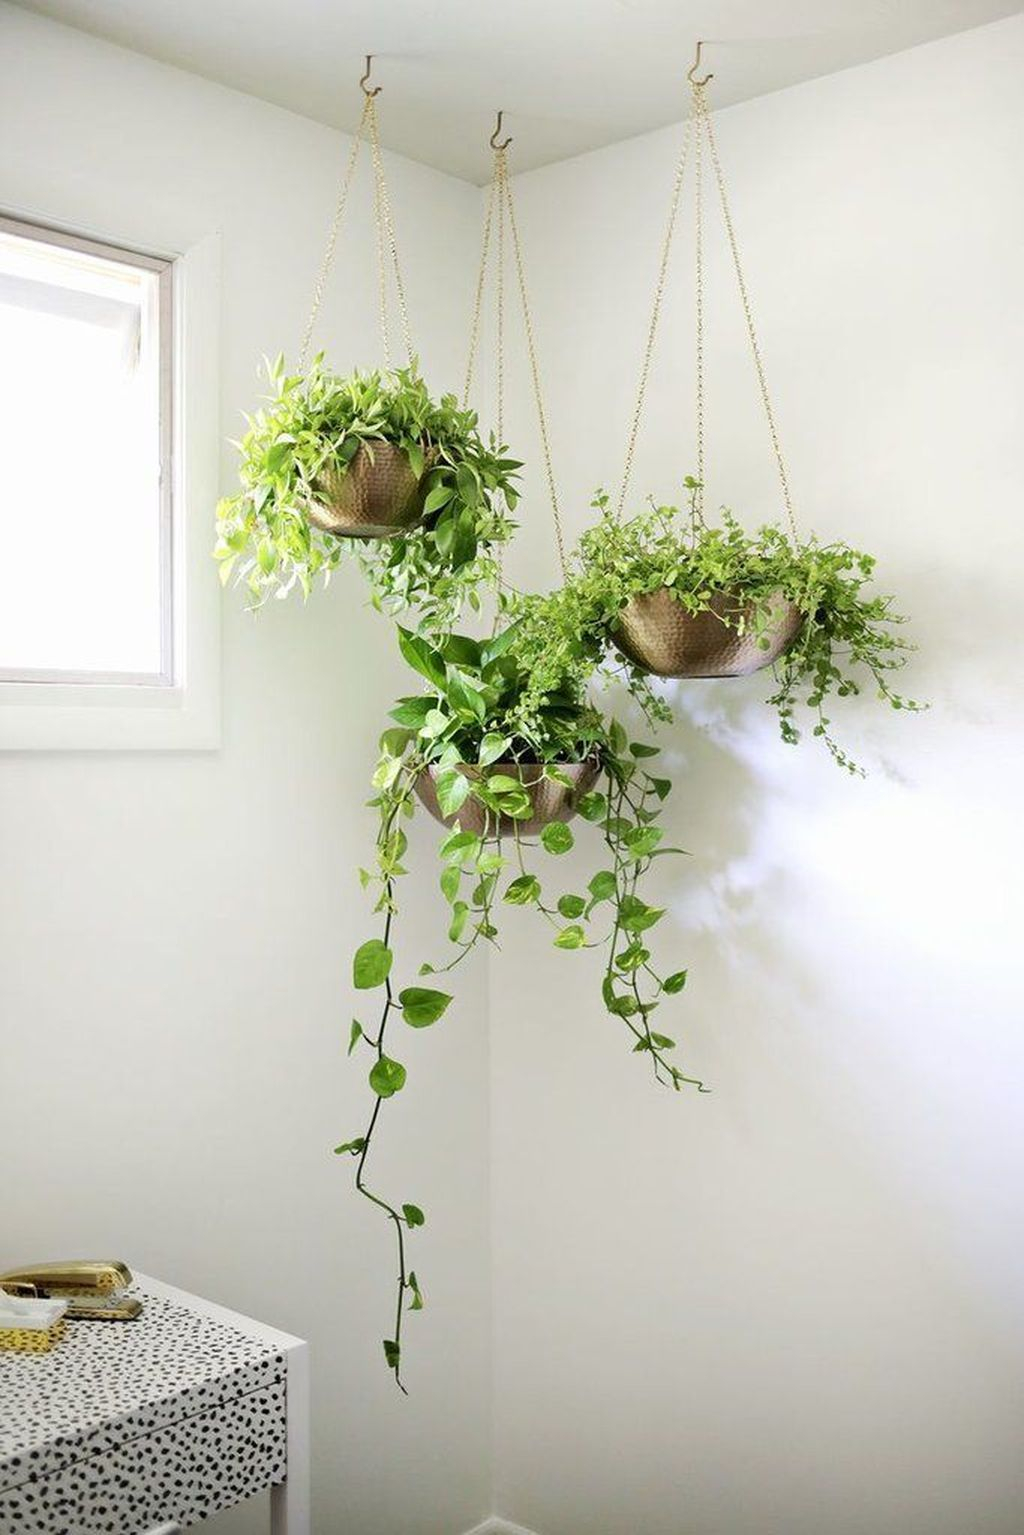 Awesome Indoor Plant Decoration Ideas To Make Natural Comfort In Your Home15